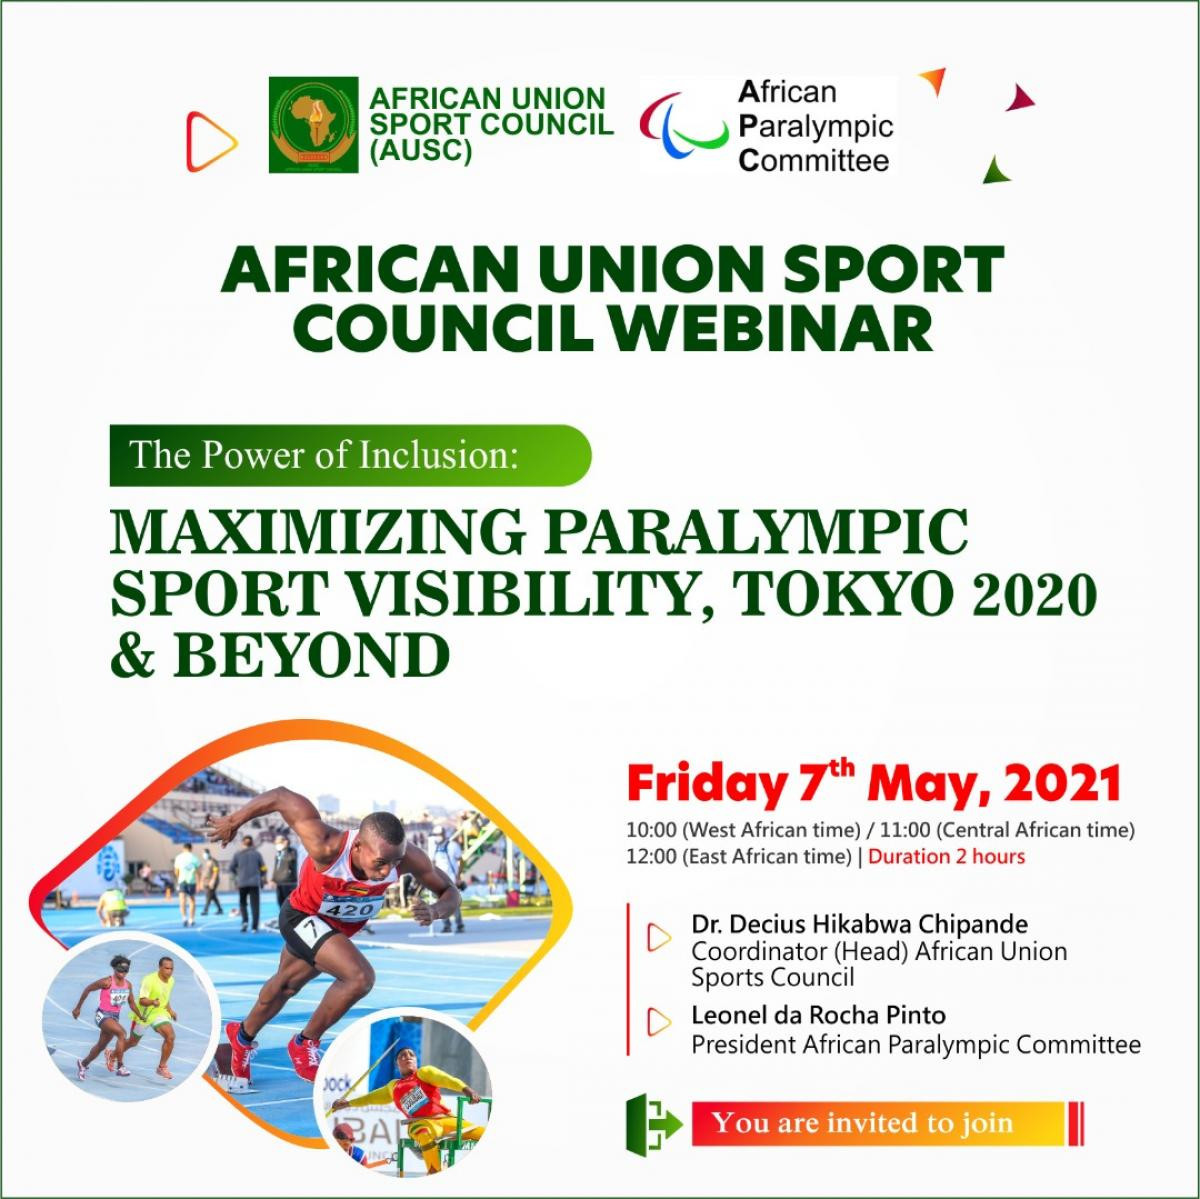 The webinar is being jointly organised by the African Paralympic Committee and African Union Sport Council ©APC